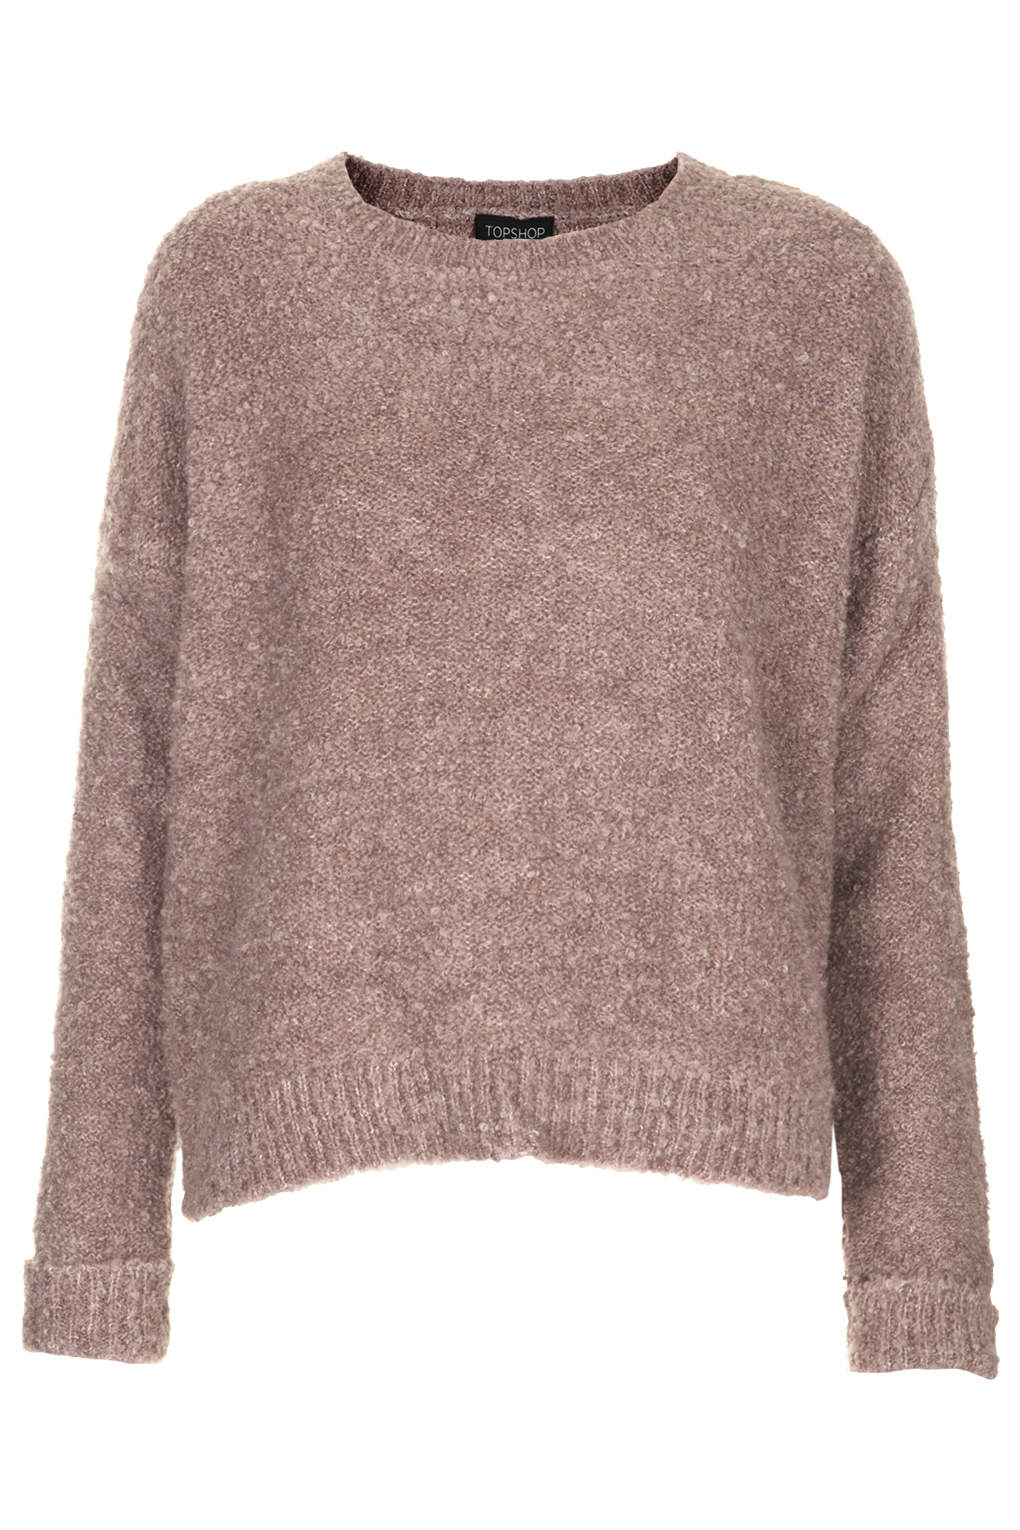 Topshop Boucle Sweater in Brown (Dusty Pink) | Lyst